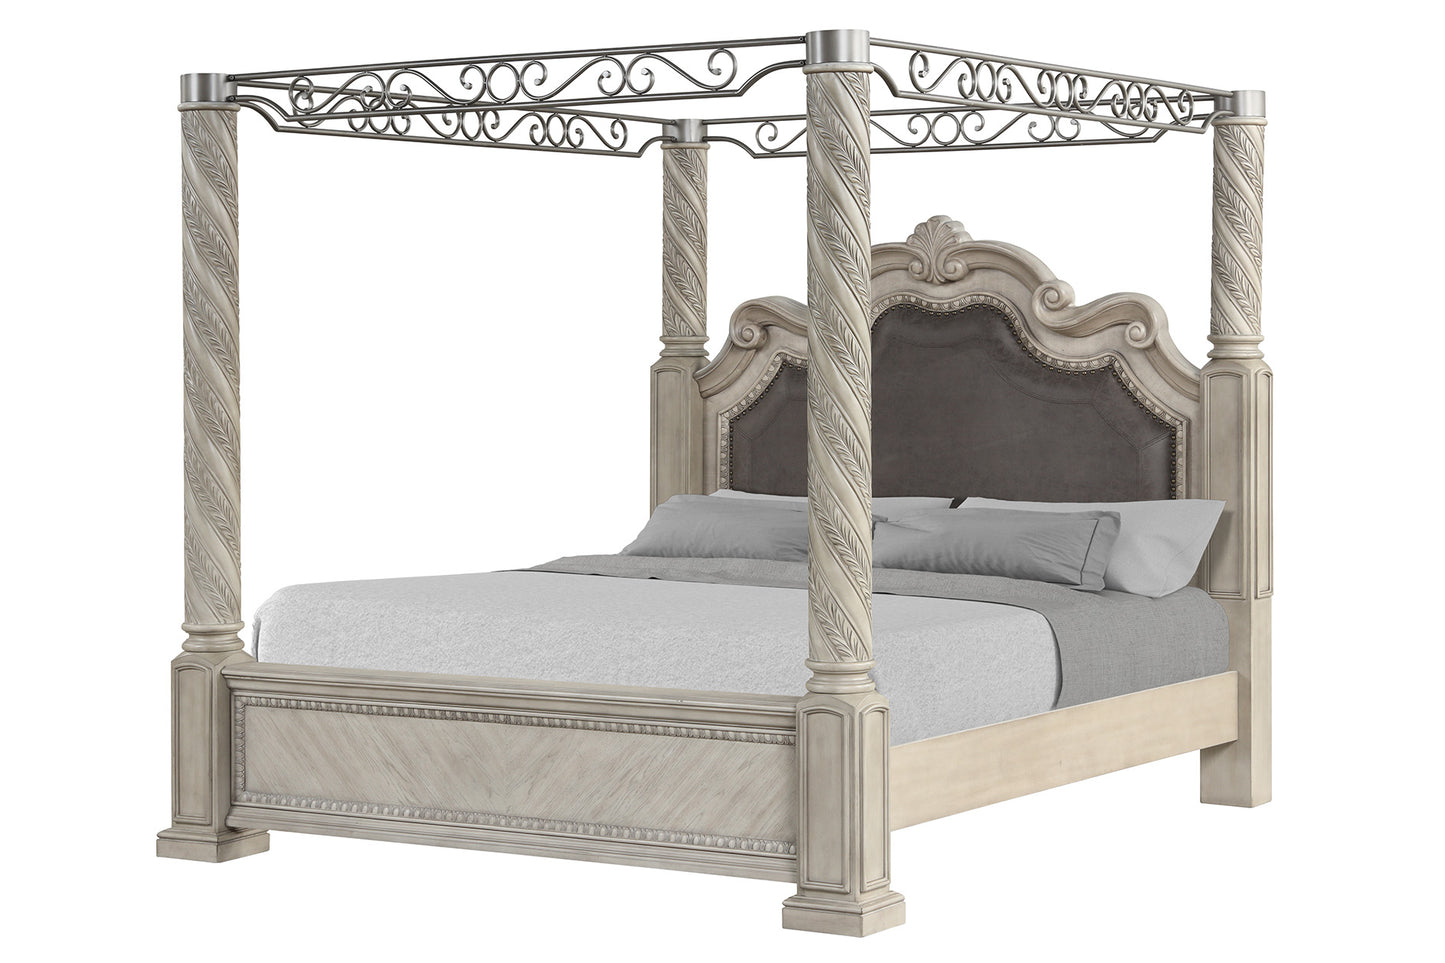 Opulence Coventry Canopy Queen Size Bedroom Set